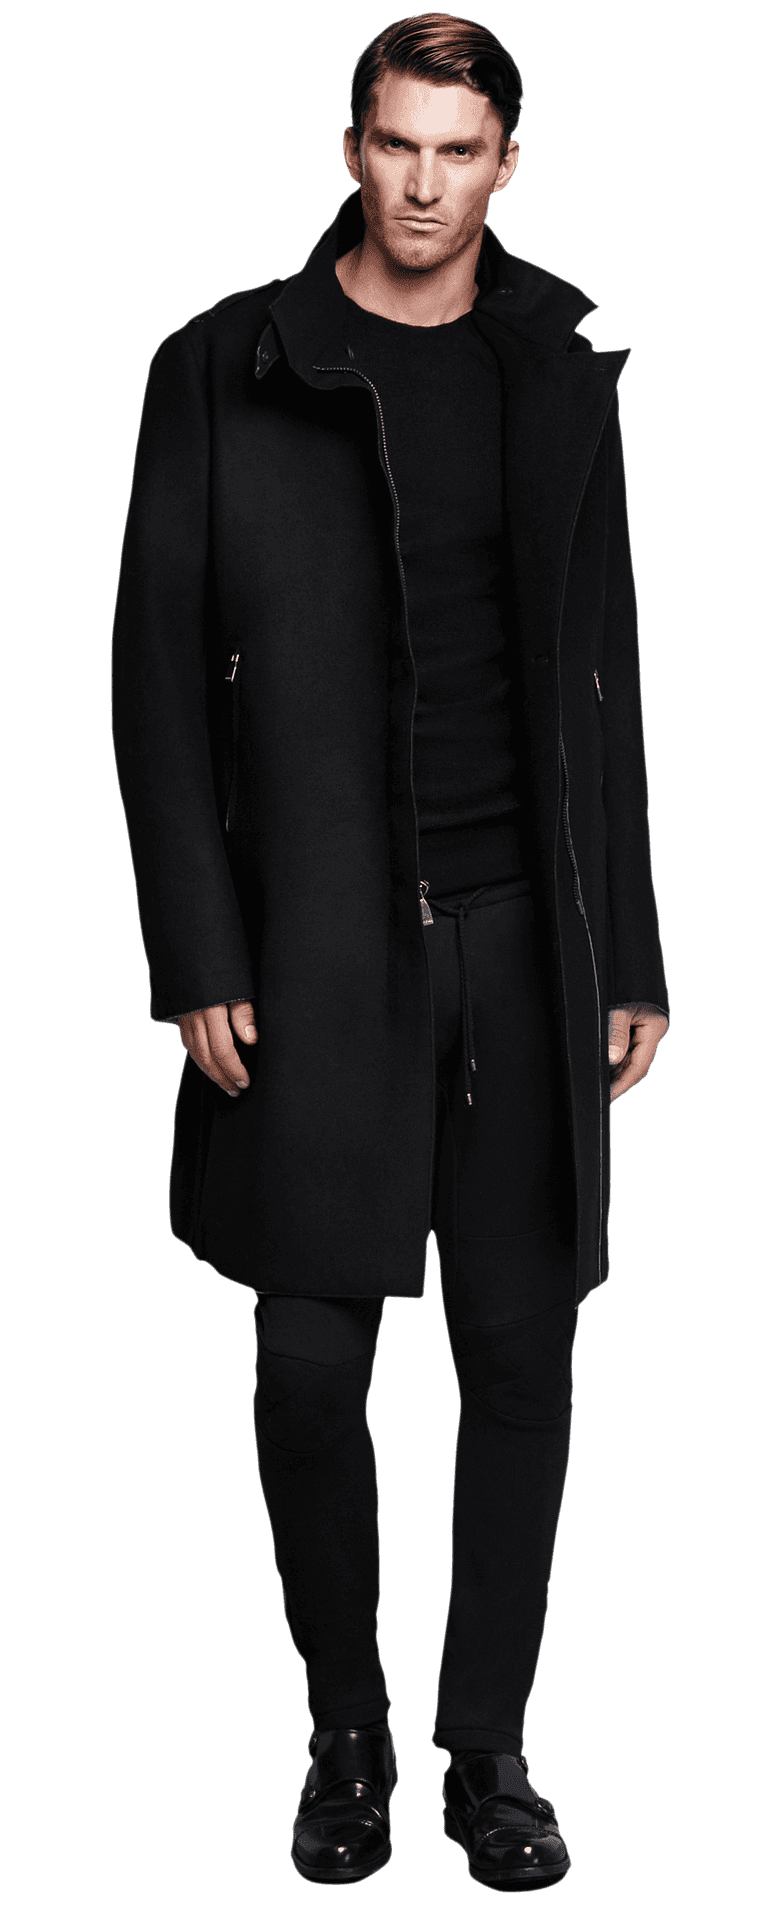 Stylish Manin Black Coatand Outfit PNG